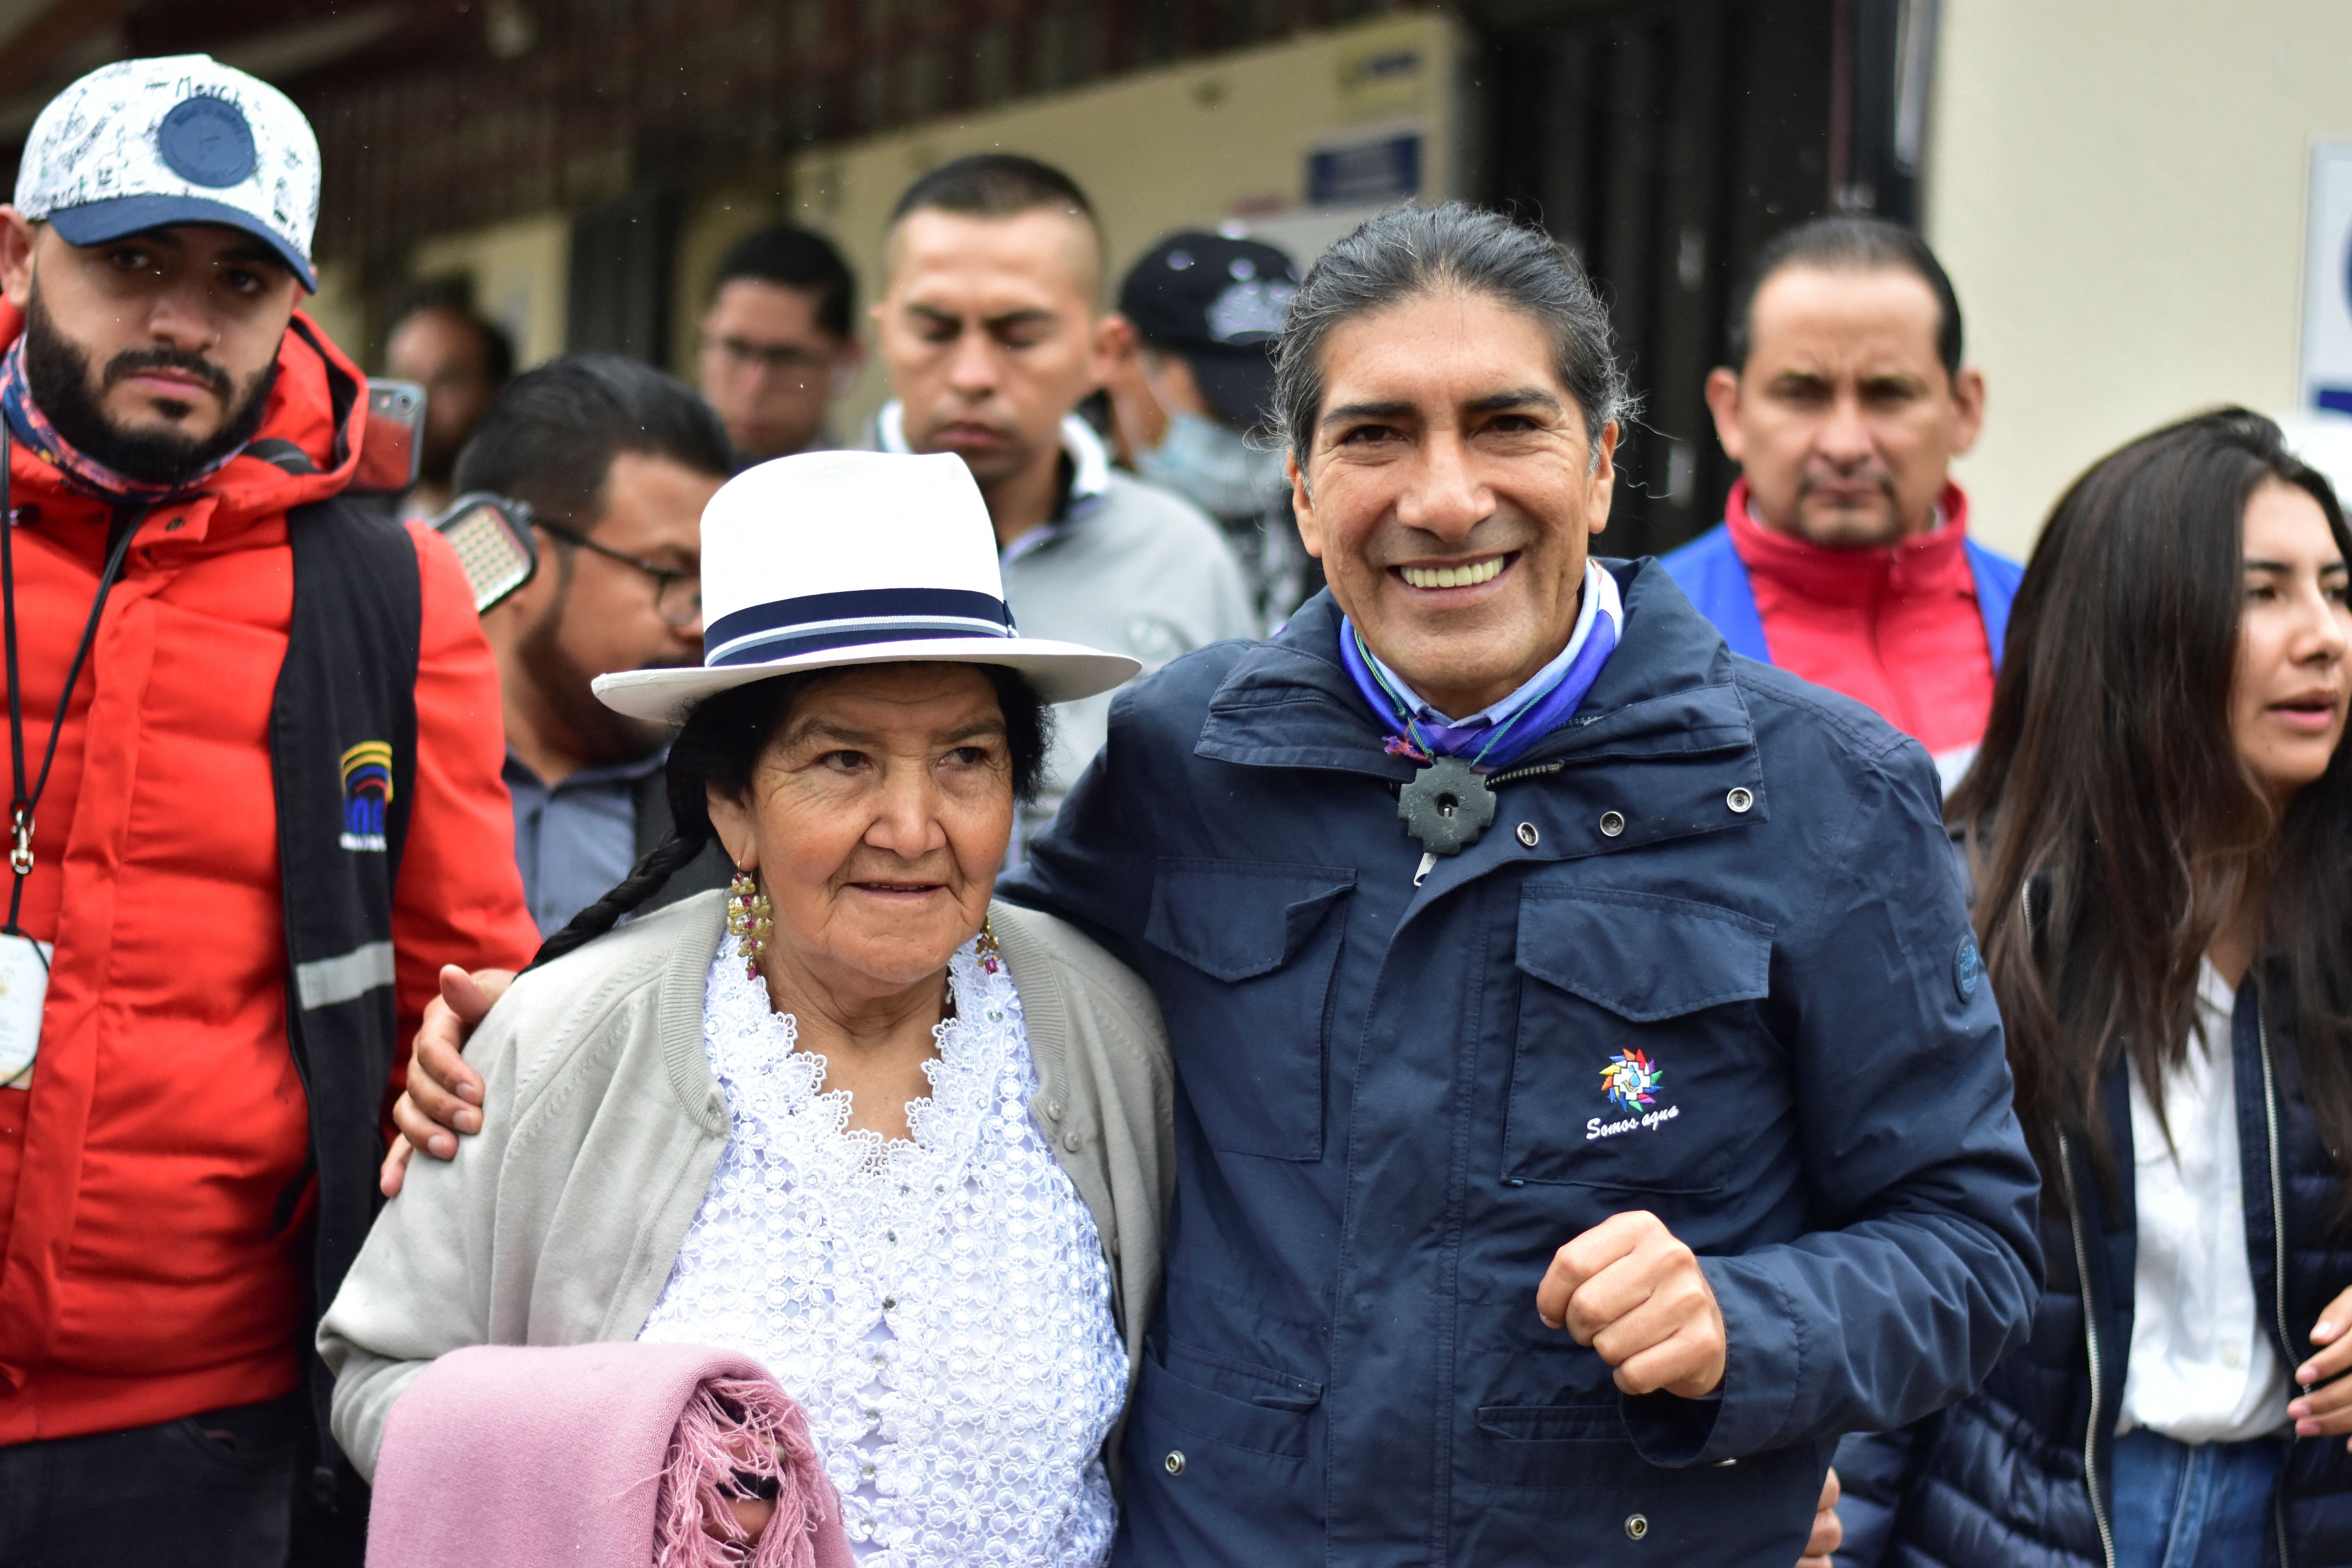 Yaku Pérez and his mother at a polling station in Cuenca (via Reuters)